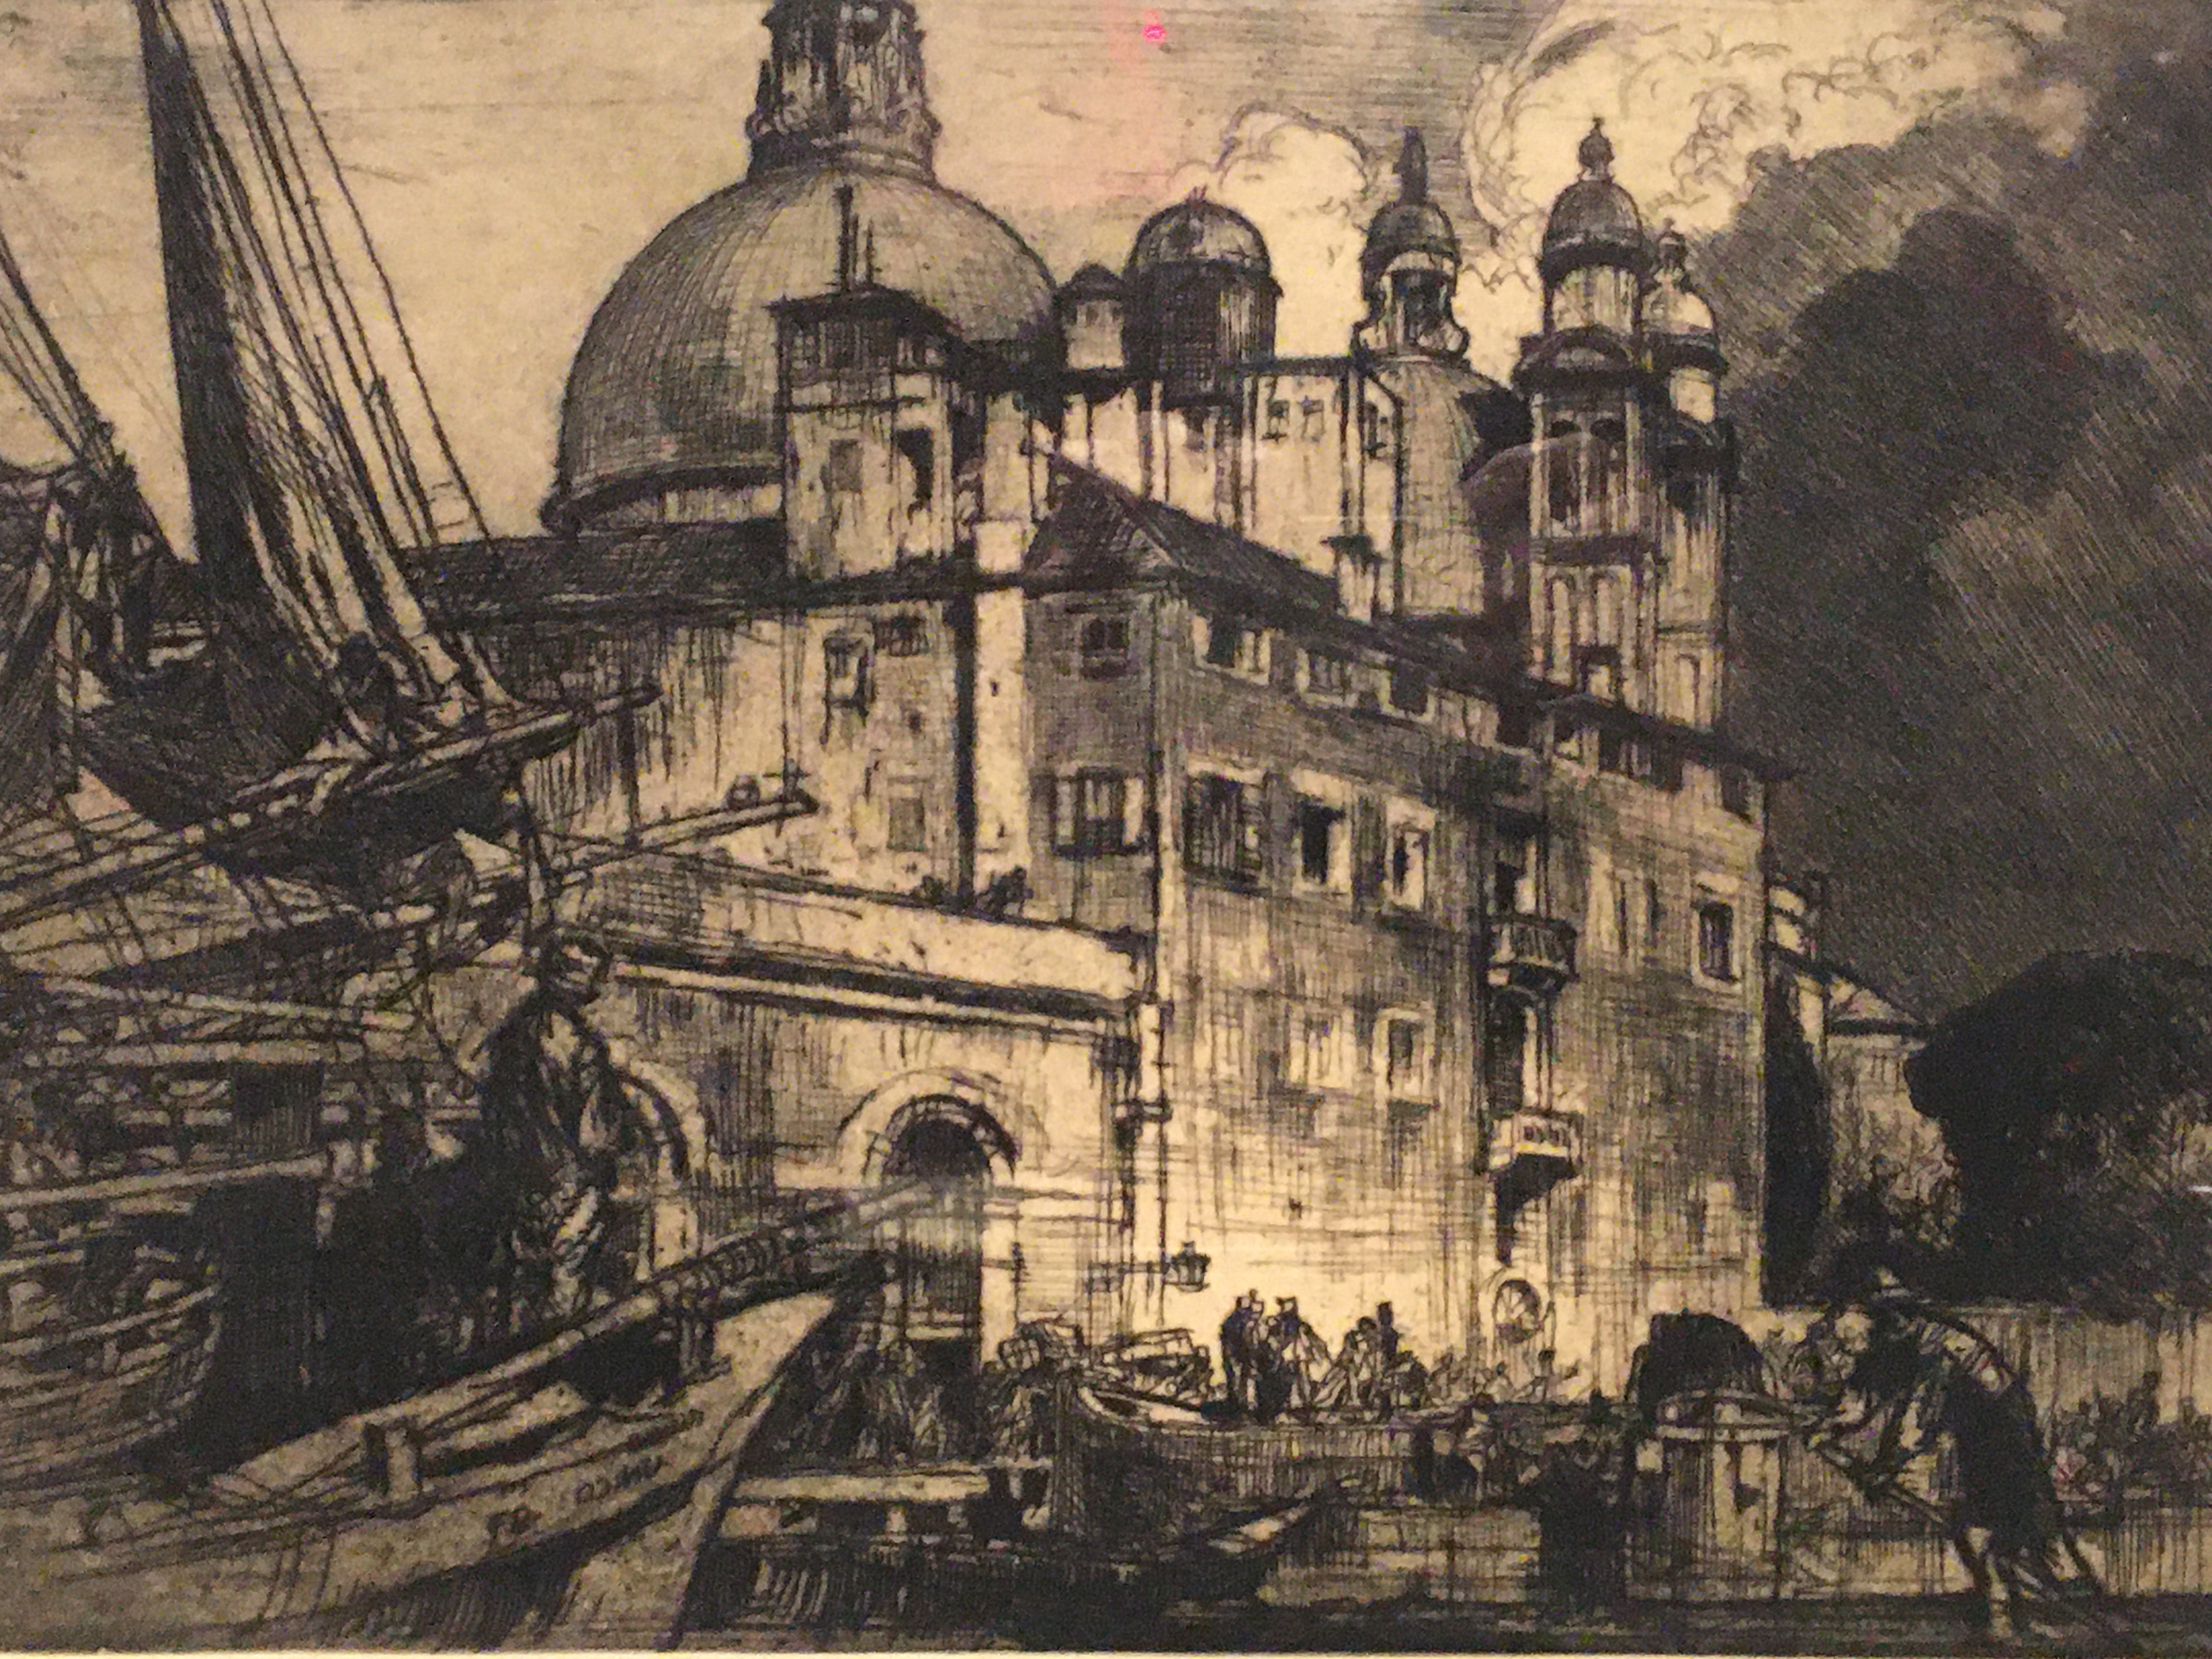 AFTER FRANK BRANGWYN (1867-1956) "Santa Maria" a study, copper etching on heavy cream wove paper, - Image 2 of 2